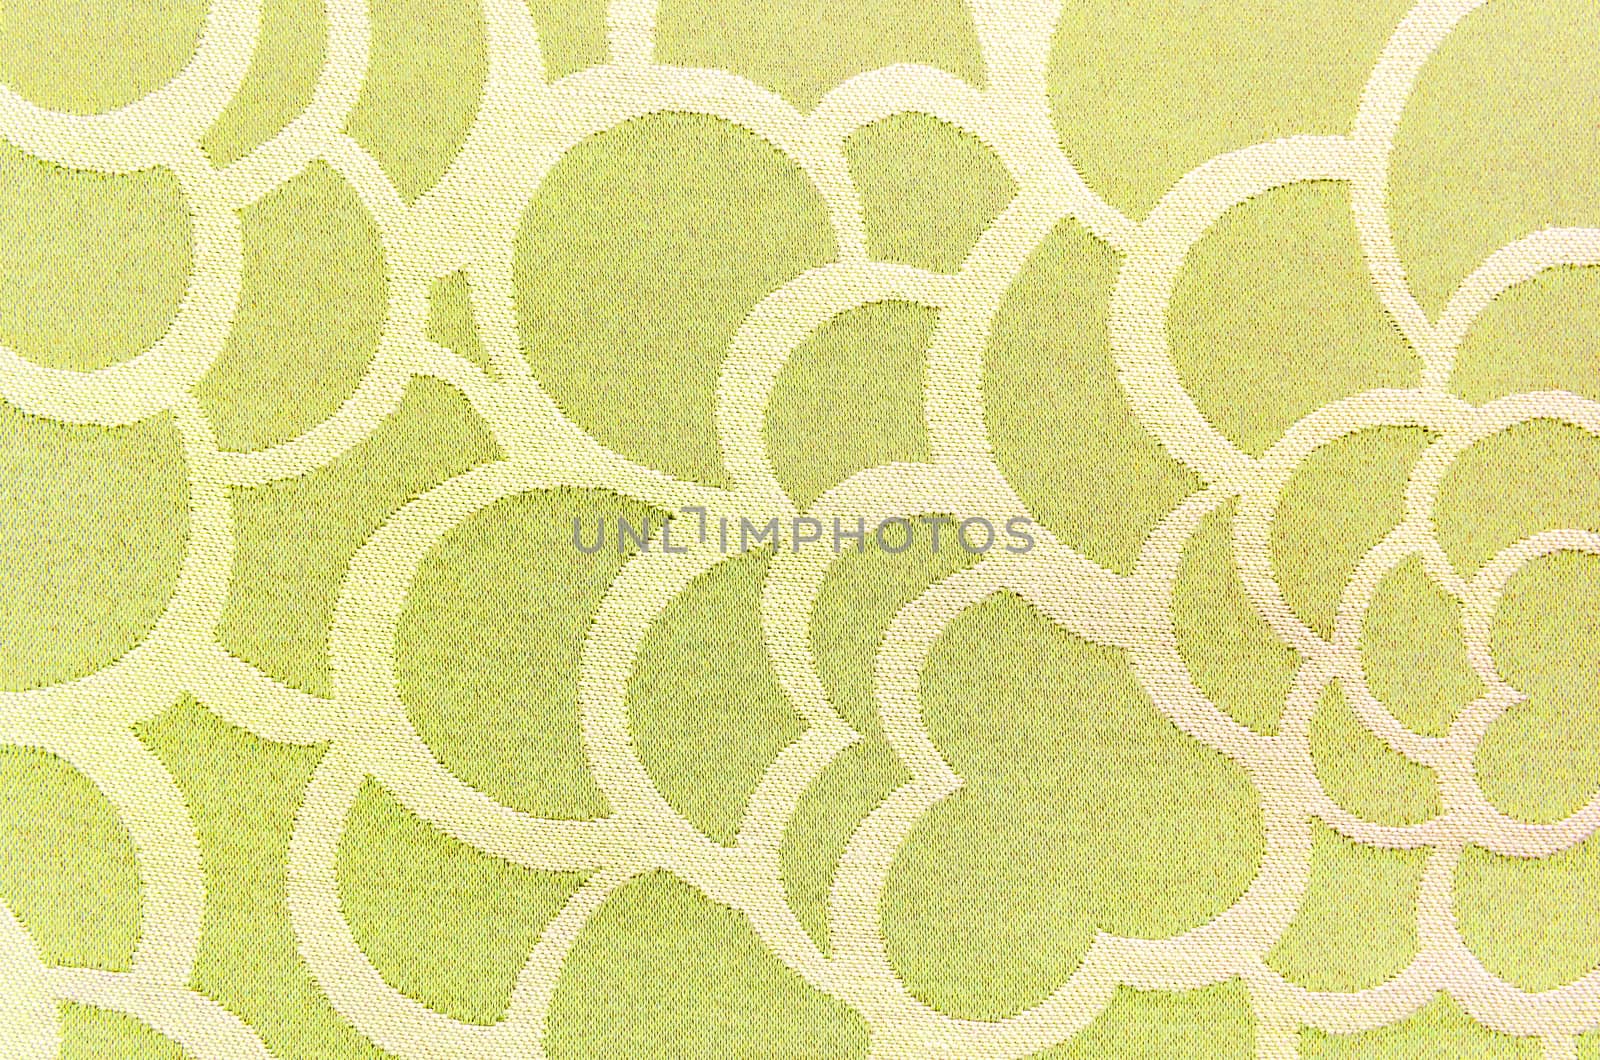 Abstract yellow circle fabric texture and background.